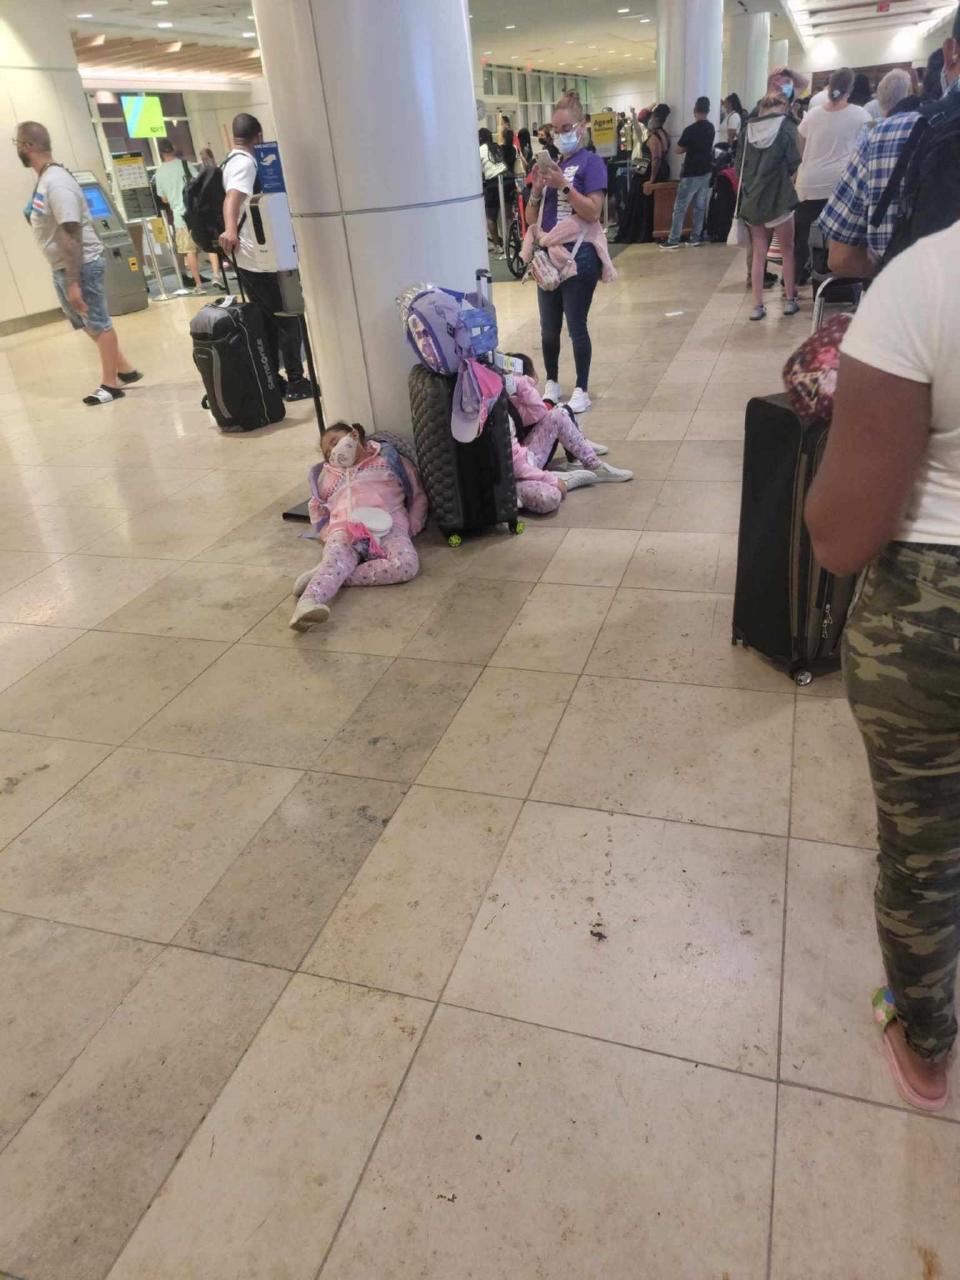 Spirit Airlines passengers waited in long lines at Orlando International Airport before dawn Monday morning after a flurry of Sunday flight cancellations.